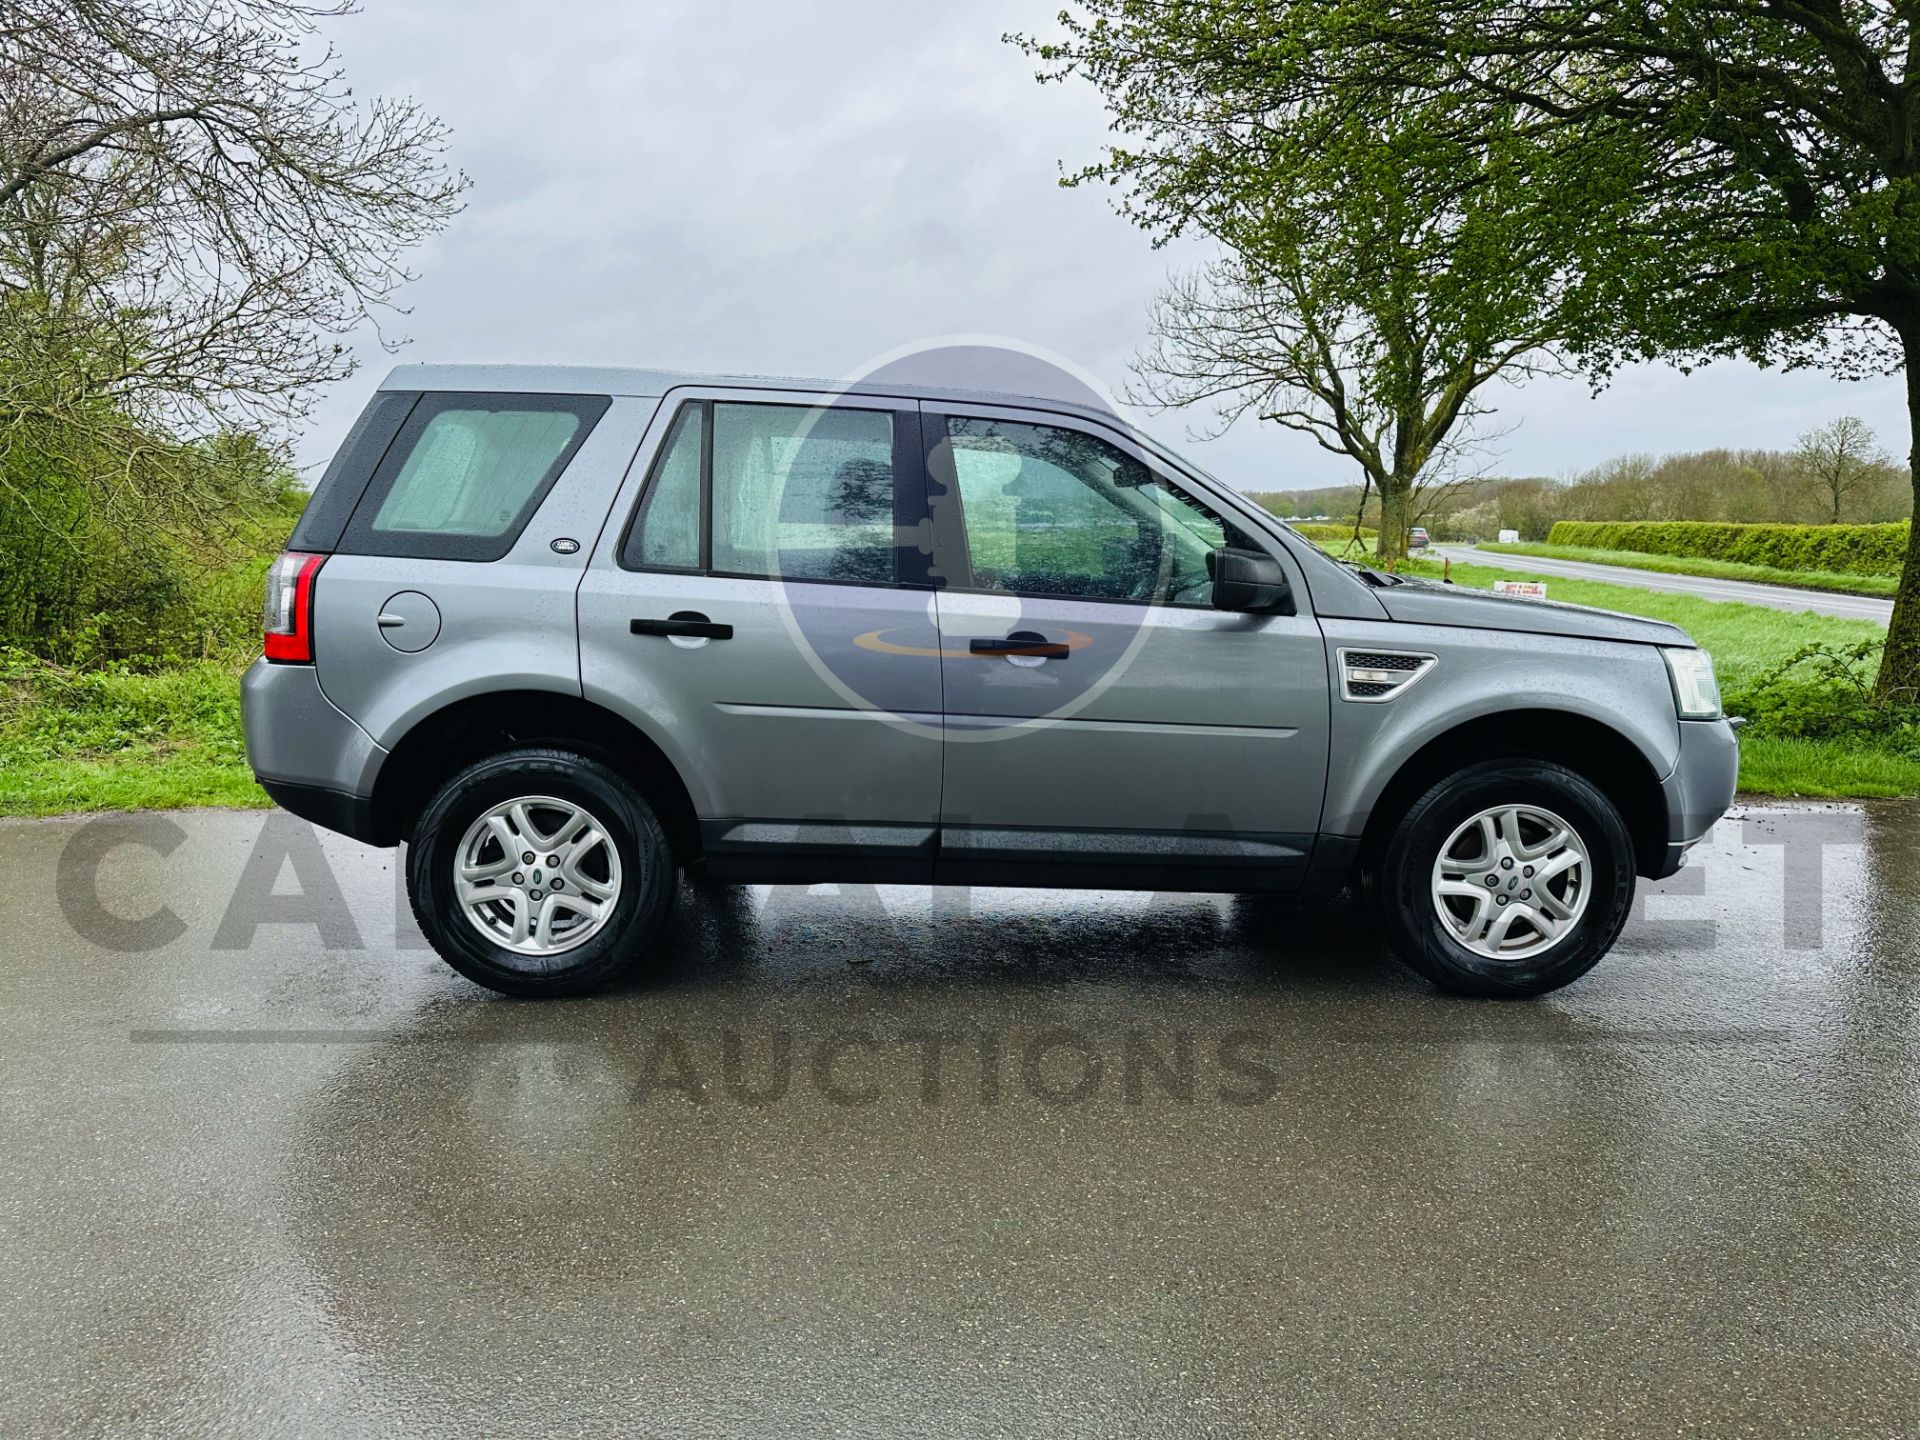 (ON SALE) LANDROVER FREELANDER 2.2TD4 S EDITION "AUTO - 2012 MODEL - AIR CON - FSH - Image 10 of 33